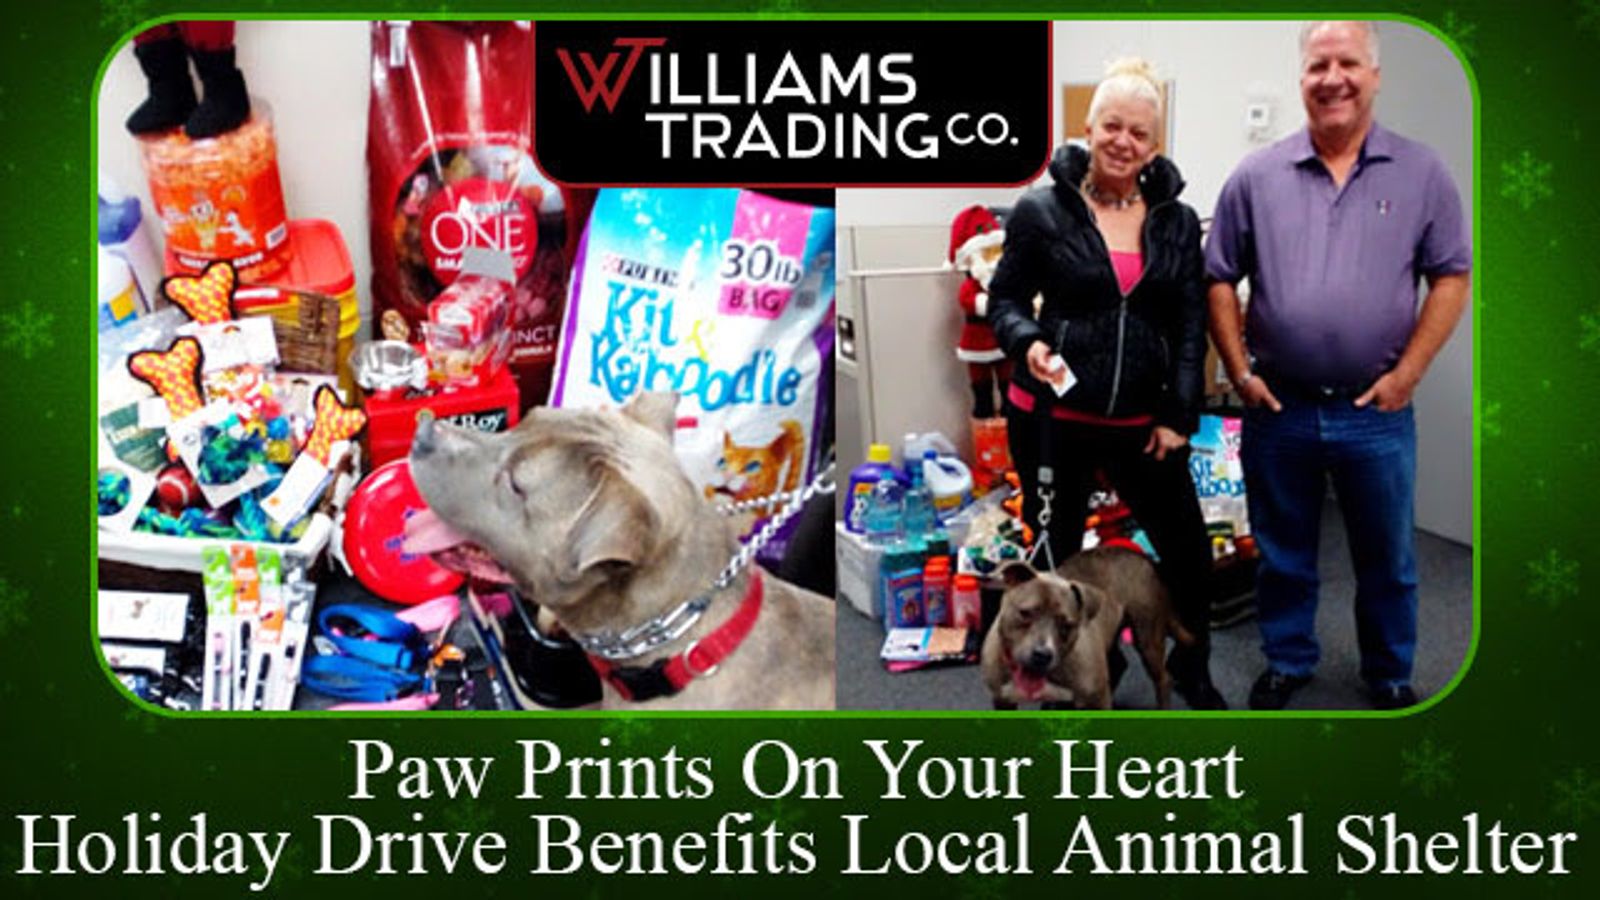 Williams Trading Conducts Paw Prints On Your Heart Drive For Local Animal Shelter